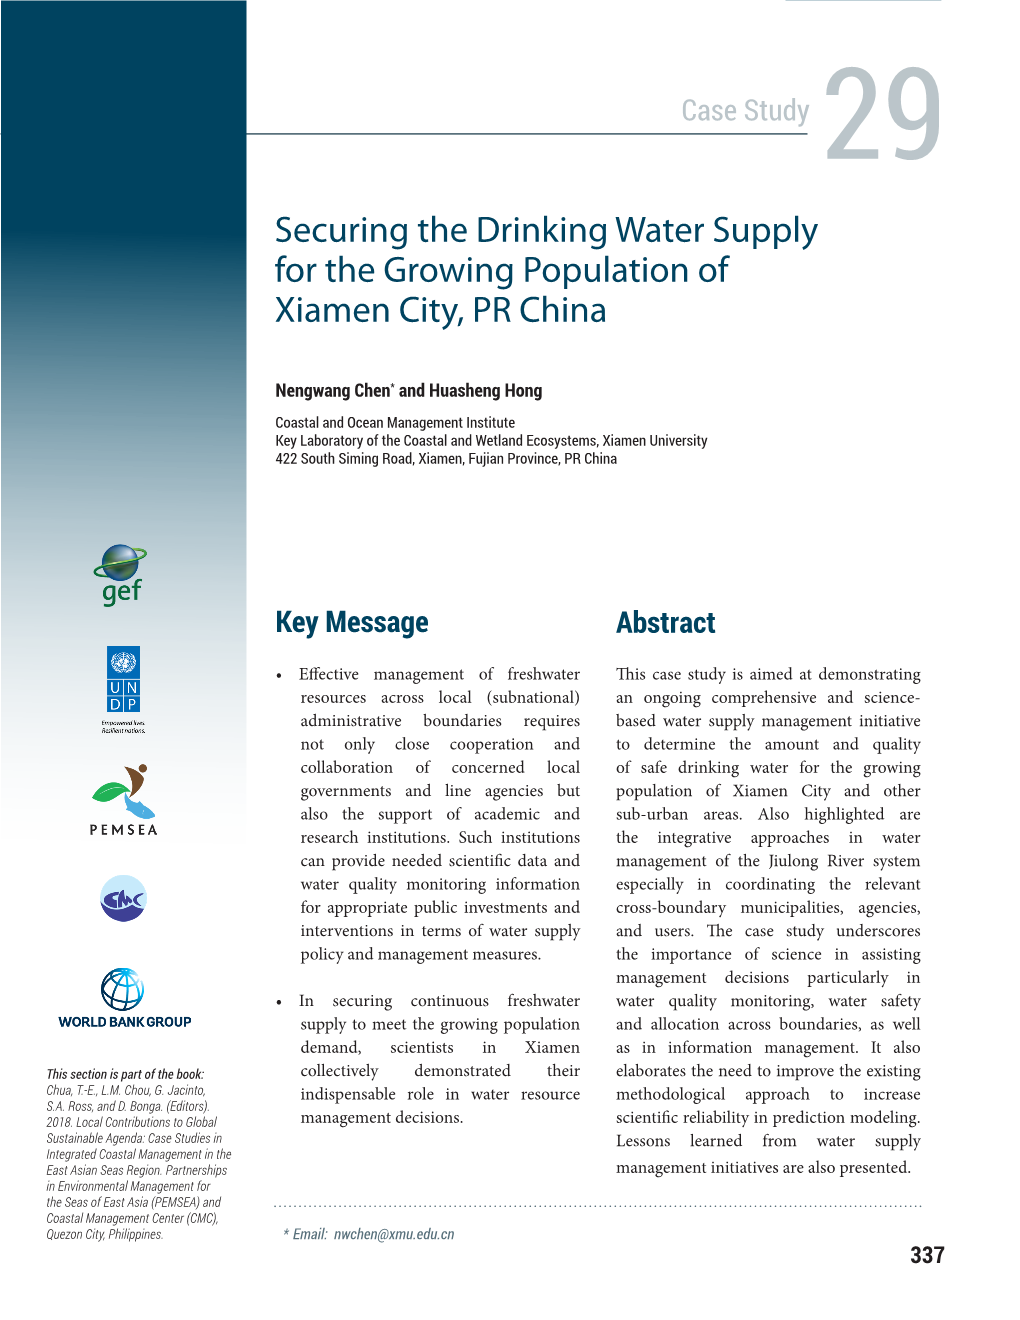 Securing the Drinking Water Supply for the Growing Population Of